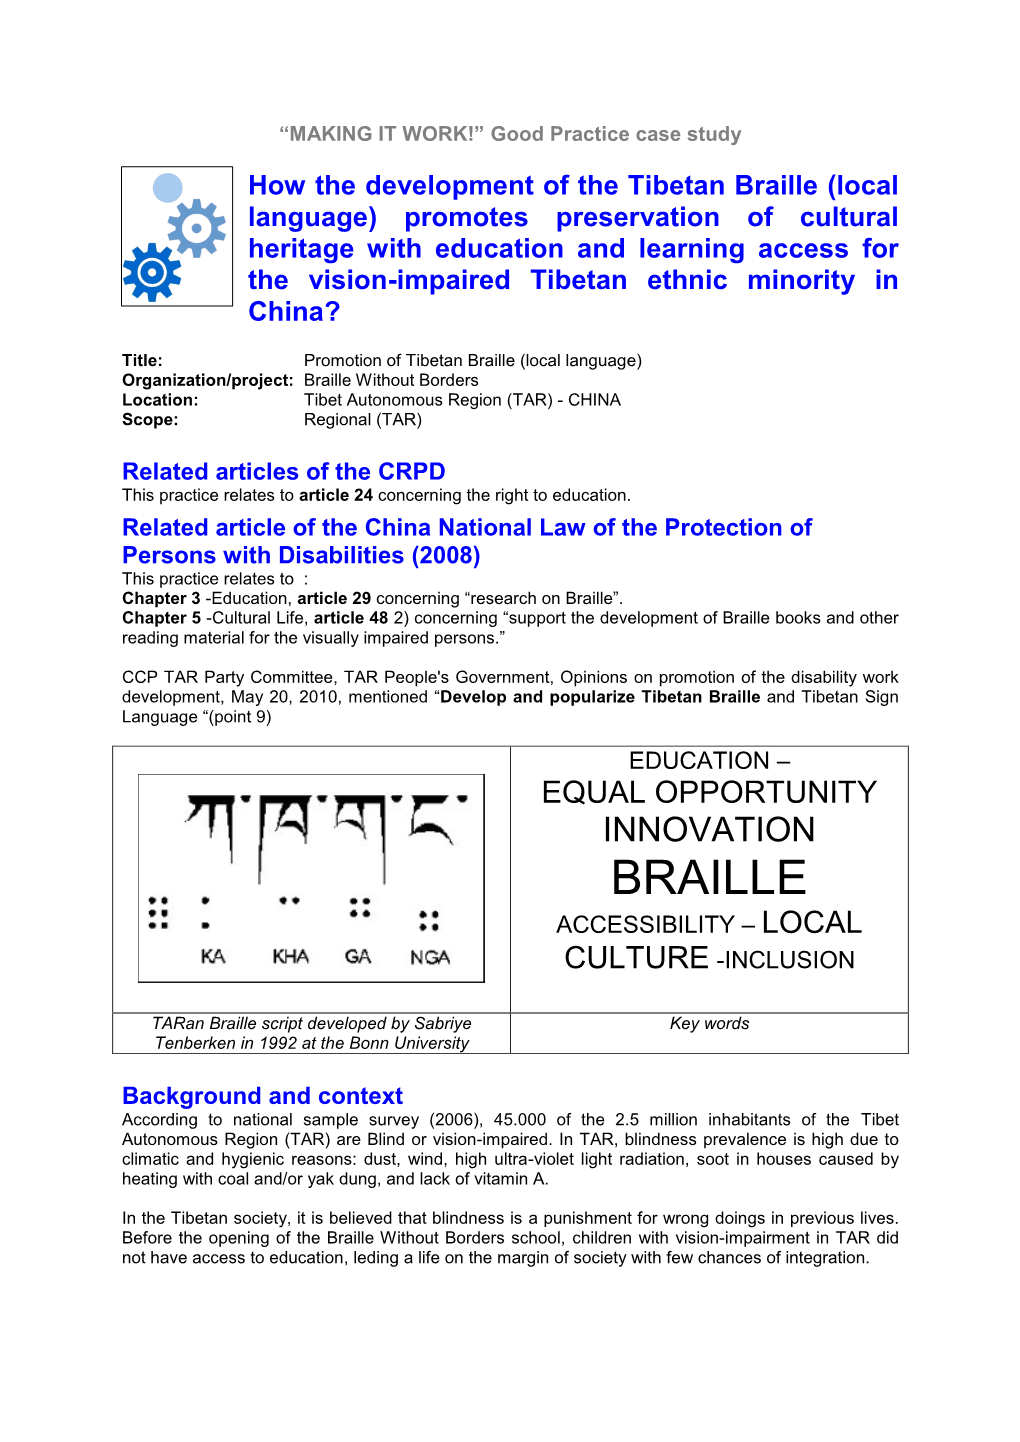 How the Development of the Tibetan Braille (Local Language)